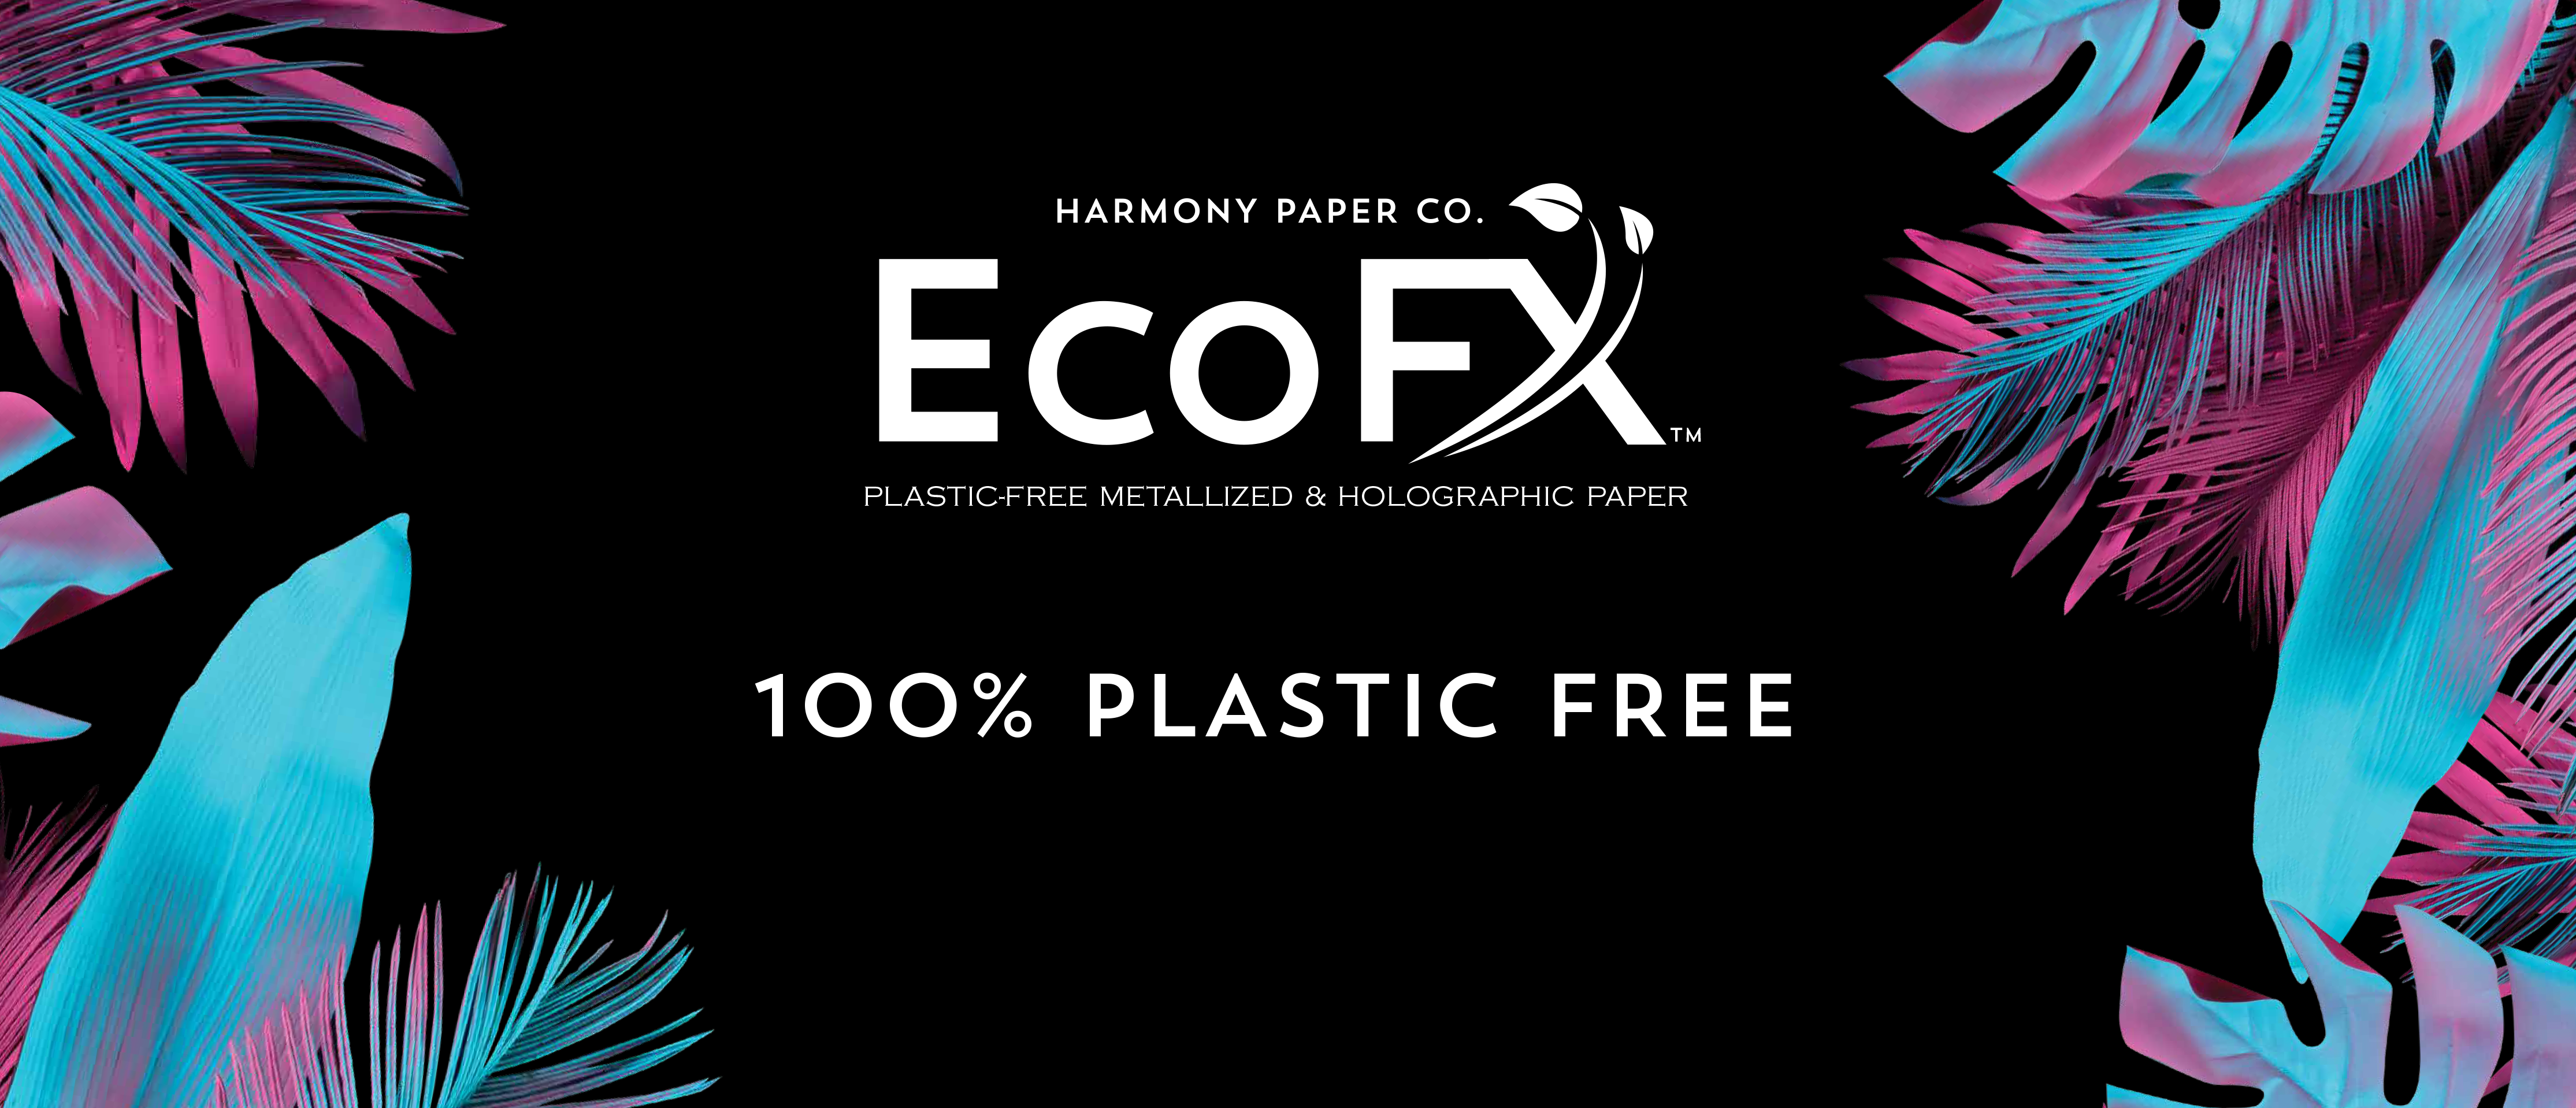 ECO-FX-RECYCLE-BANNER-R